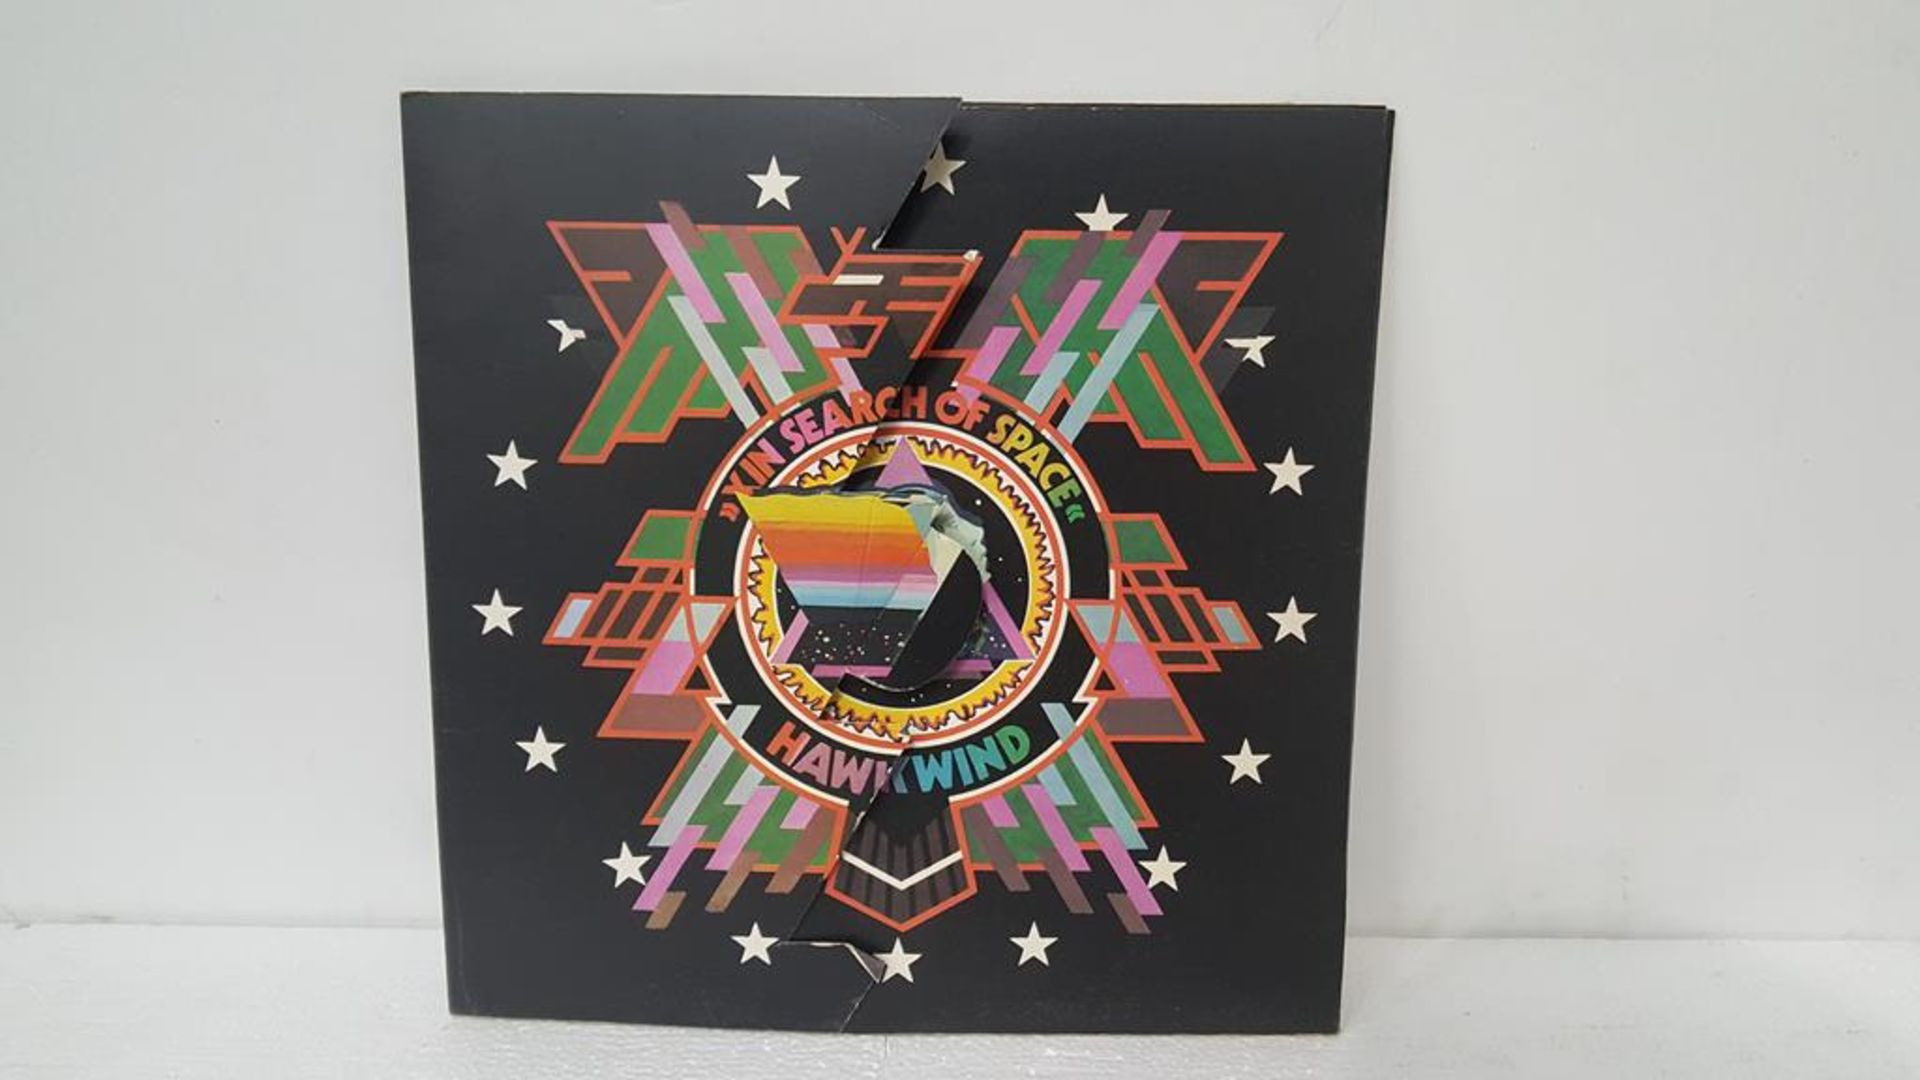 Hawkwind 'In Search of Space' LP